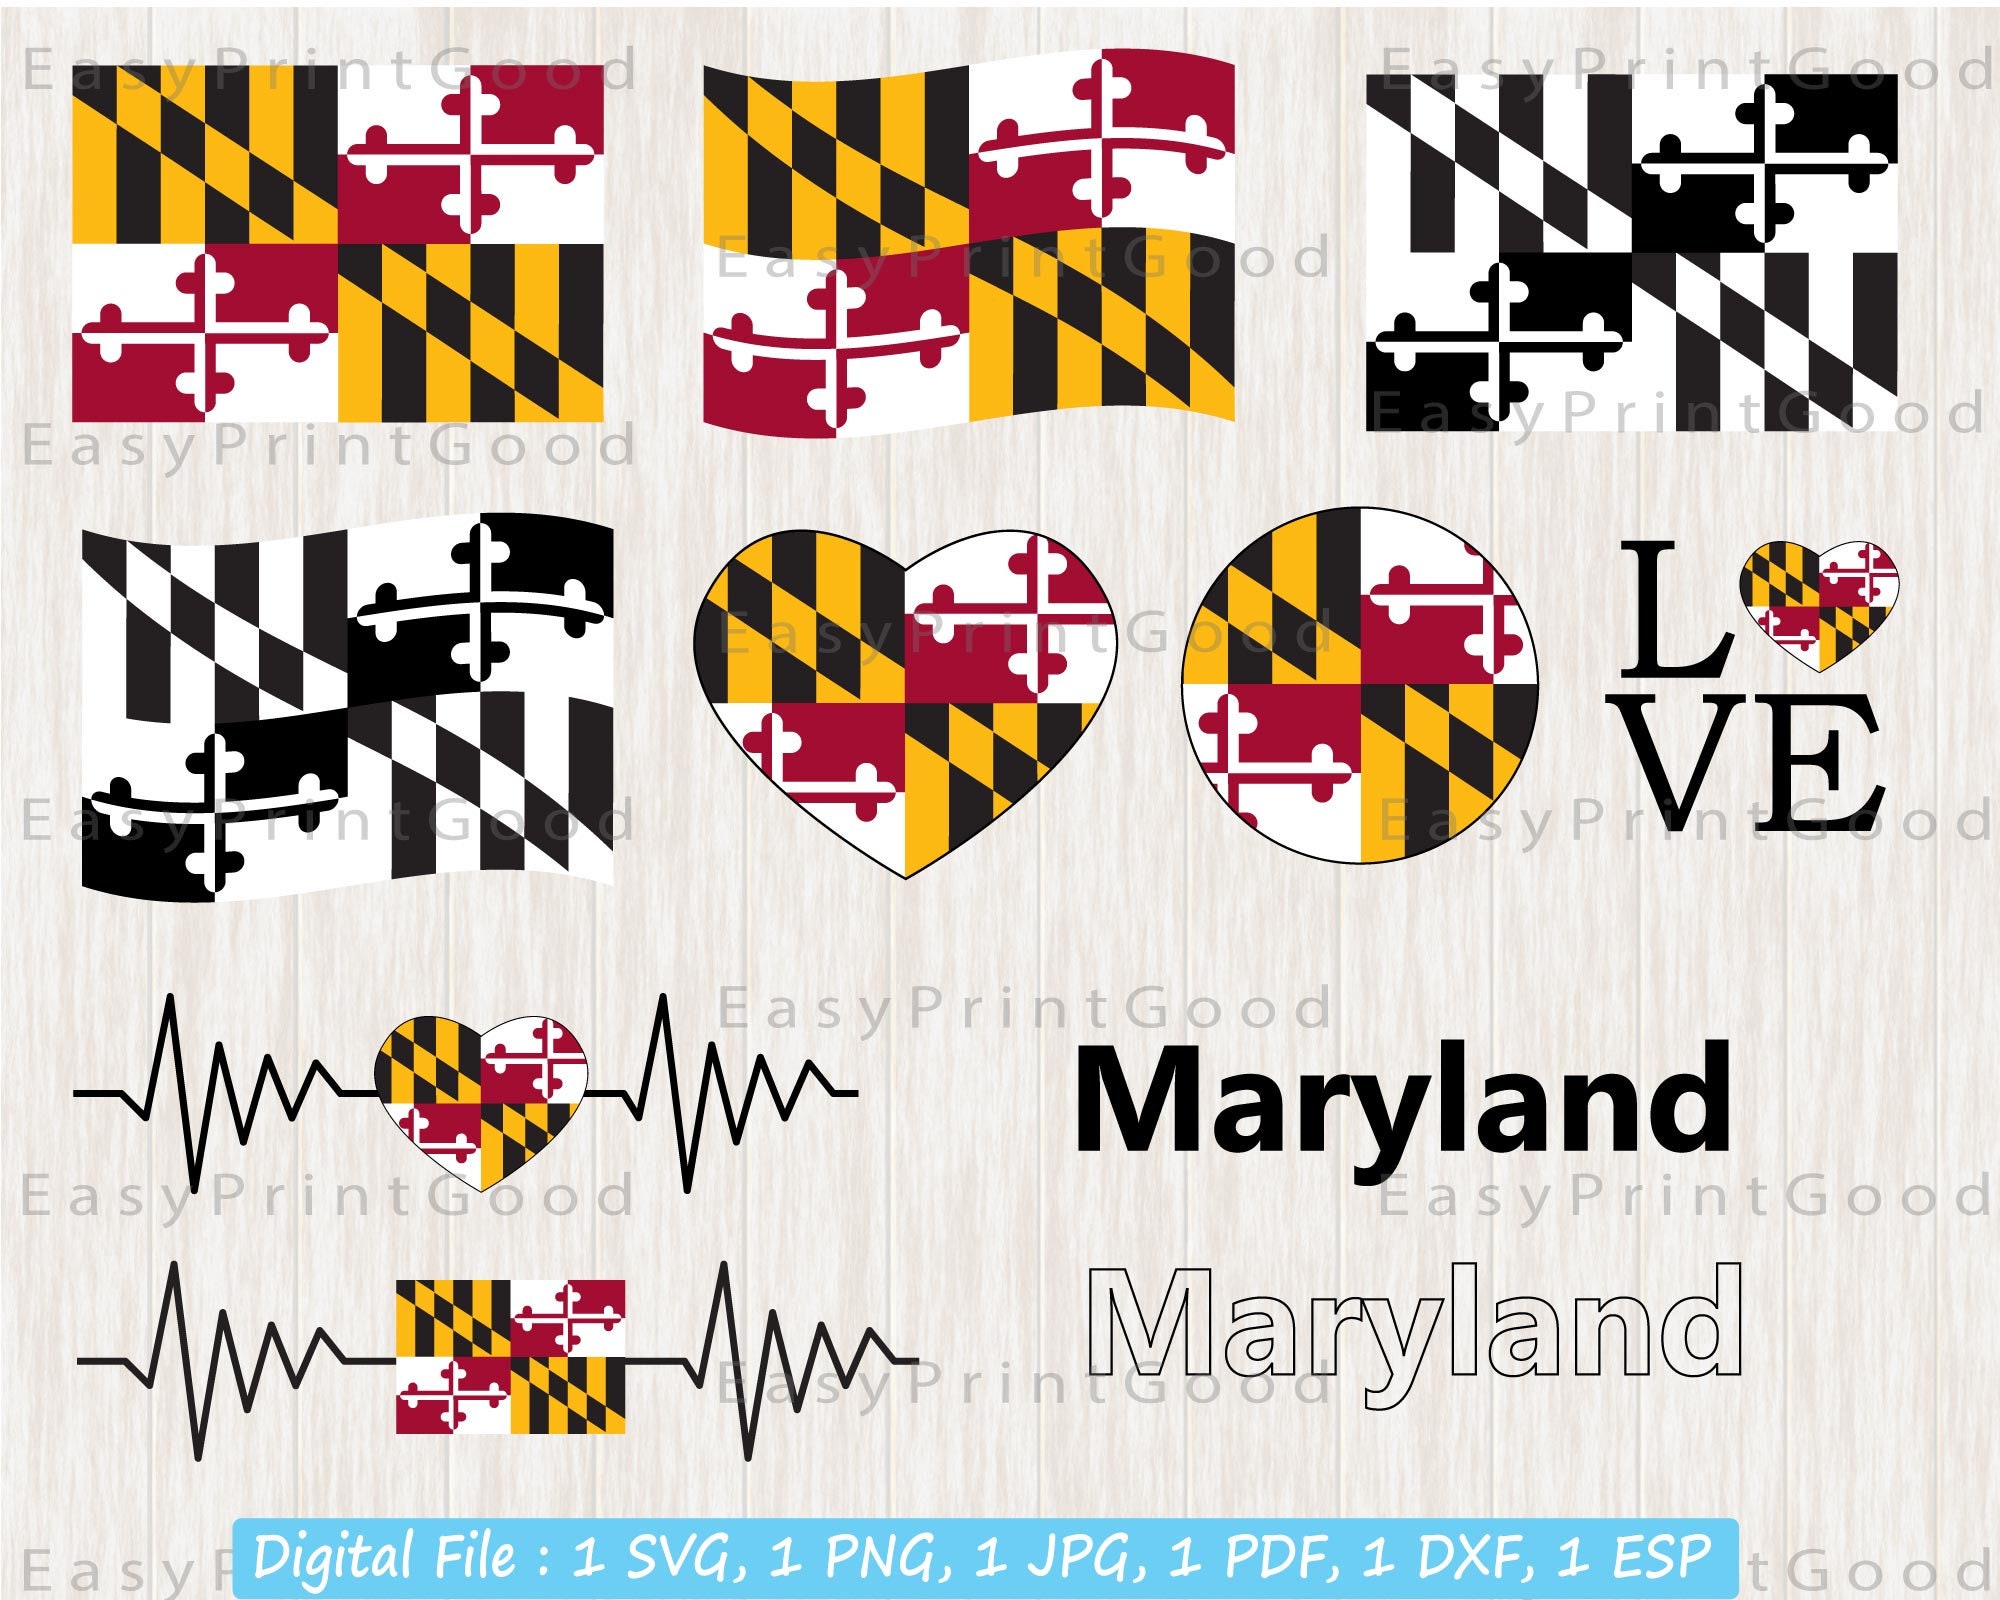 Ford Maryland State Flag Oval MD Sticker Decal - Rotten Remains